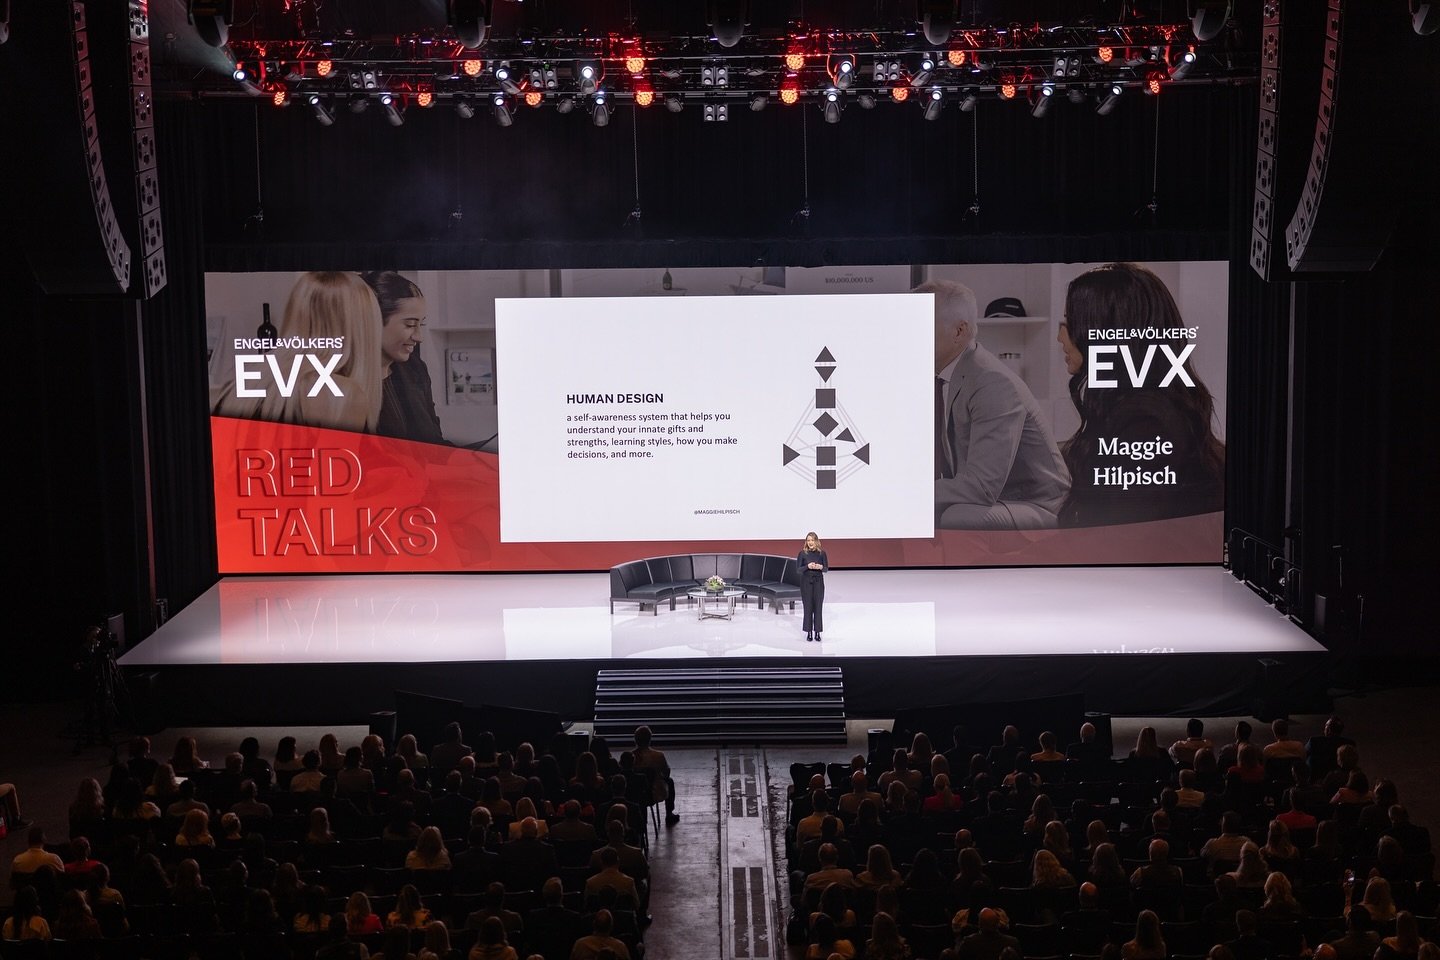 Still not over seeing human design on the main stage. I hope systems and tools like this become the norm in spaces like these. The conversations I&rsquo;ve had since EVX have been inspiring and affirming &mdash; people of all levels of experience and